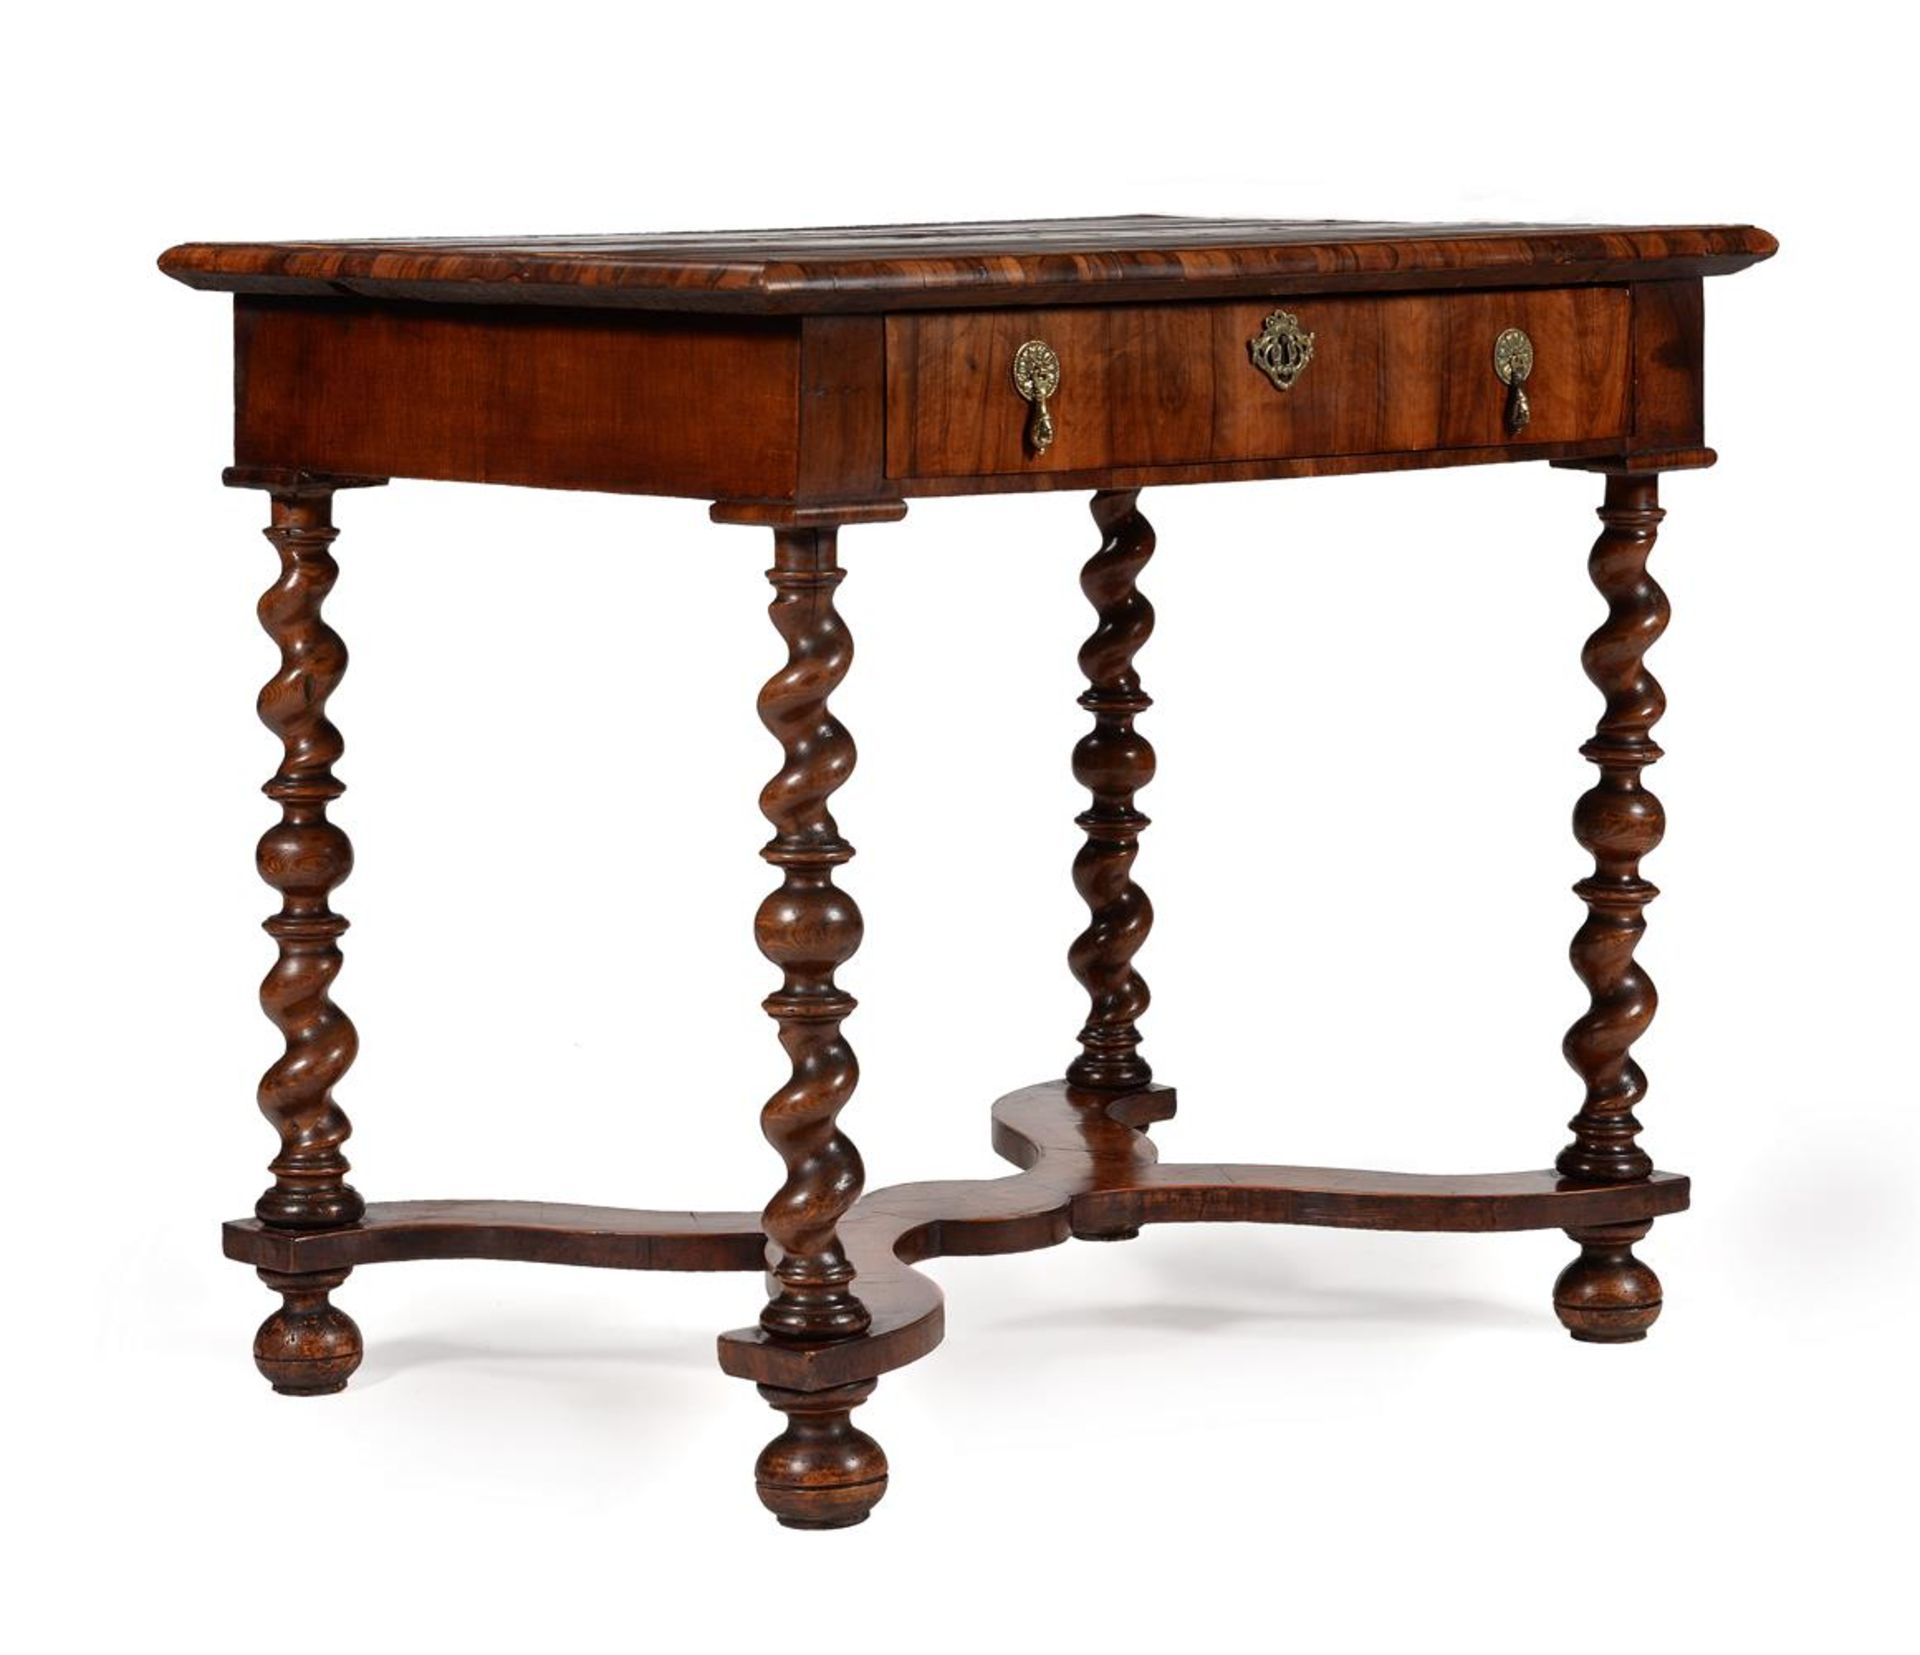 A WILLIAM & MARY OLIVEWOOD OYSTER VENEERED AND ELM SIDE TABLE, CIRCA 1690 - Image 5 of 6